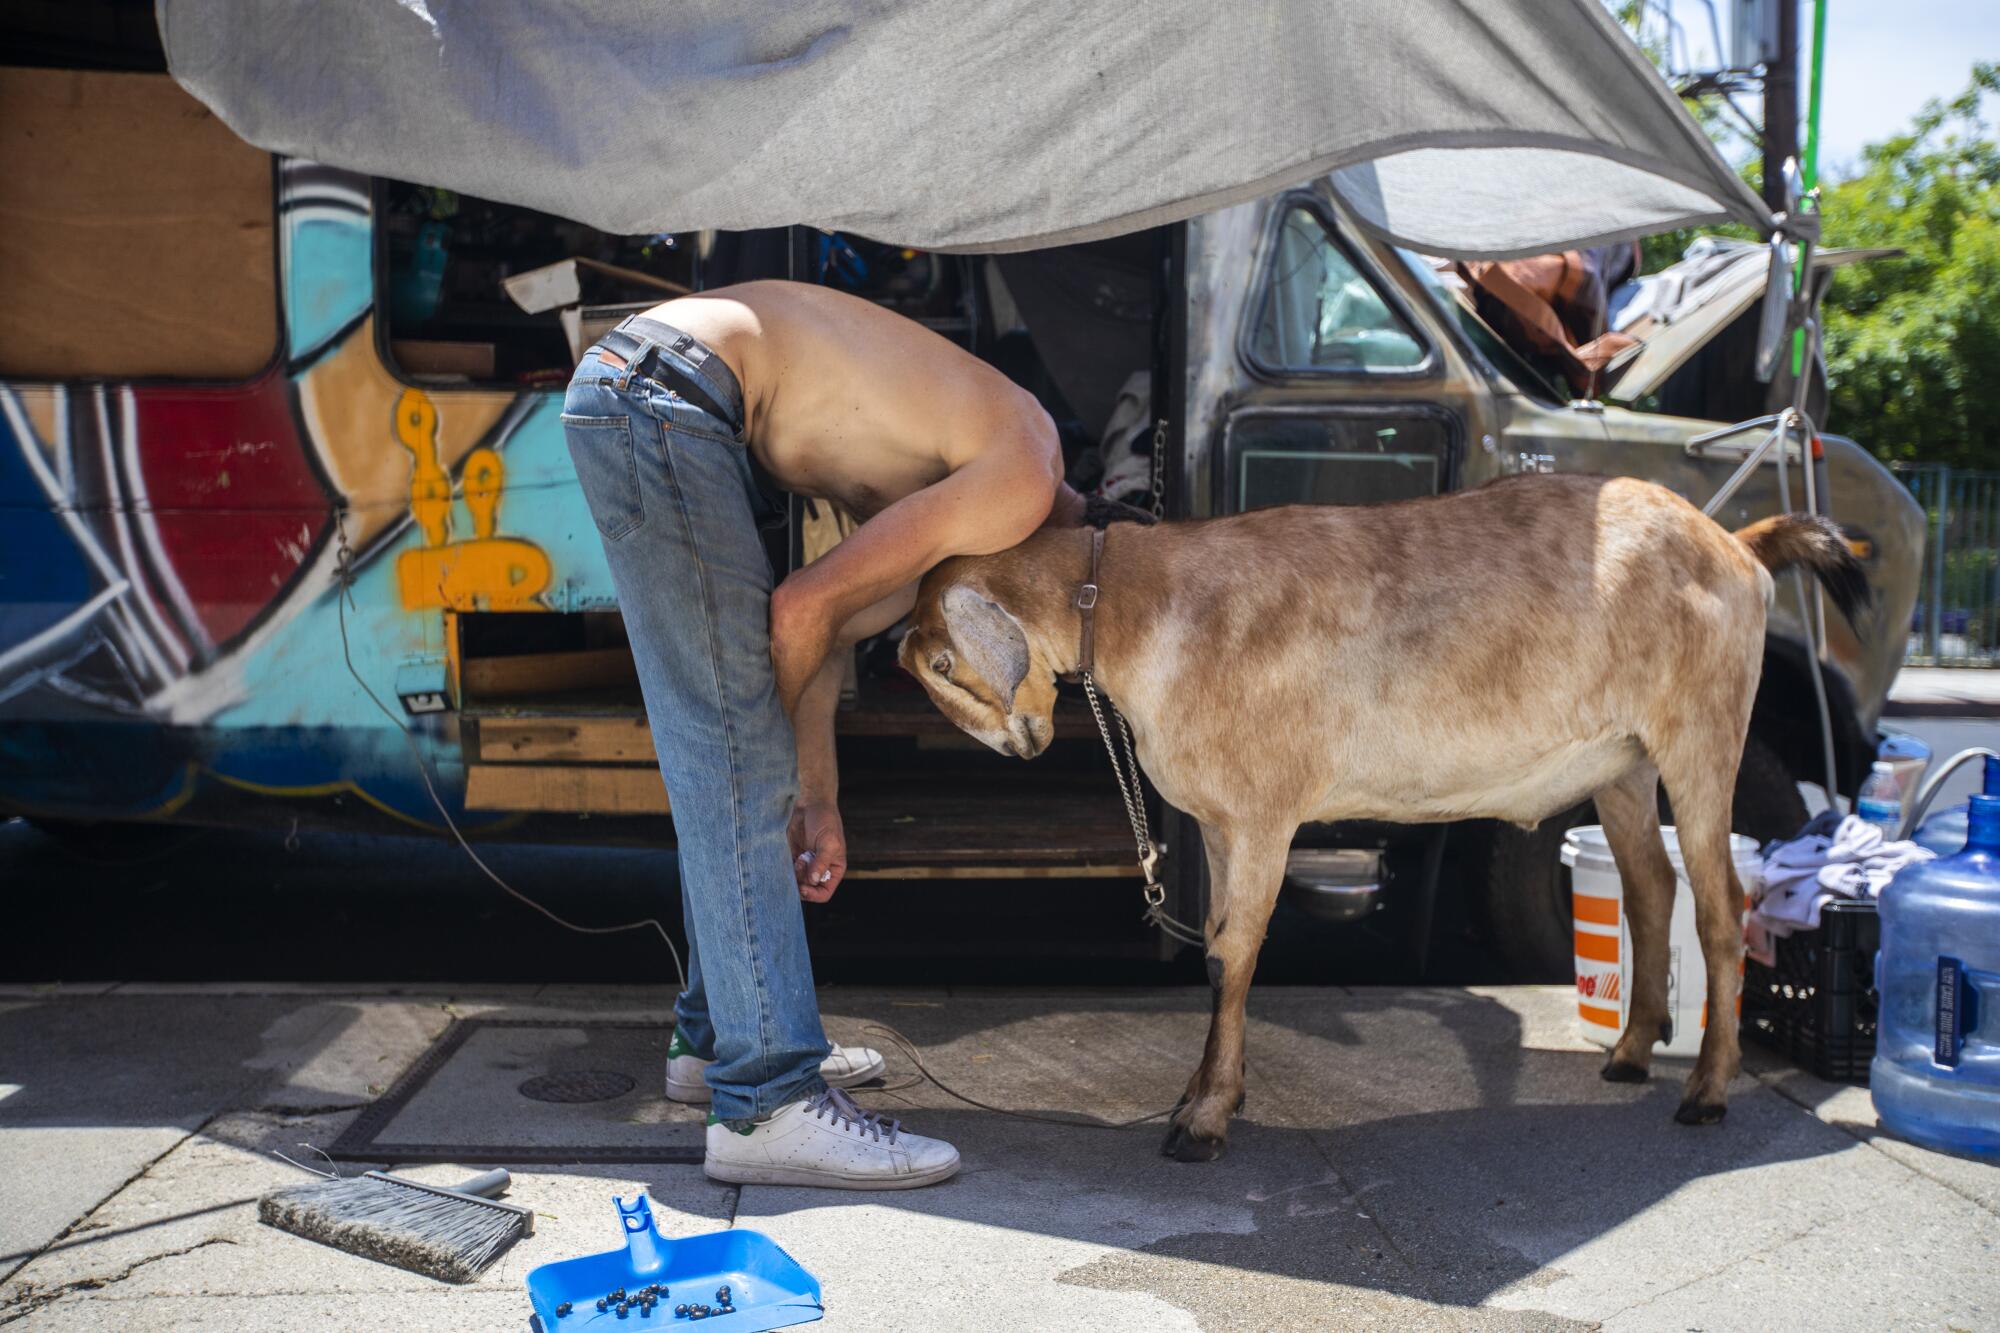 A man bends down onto his pet goat